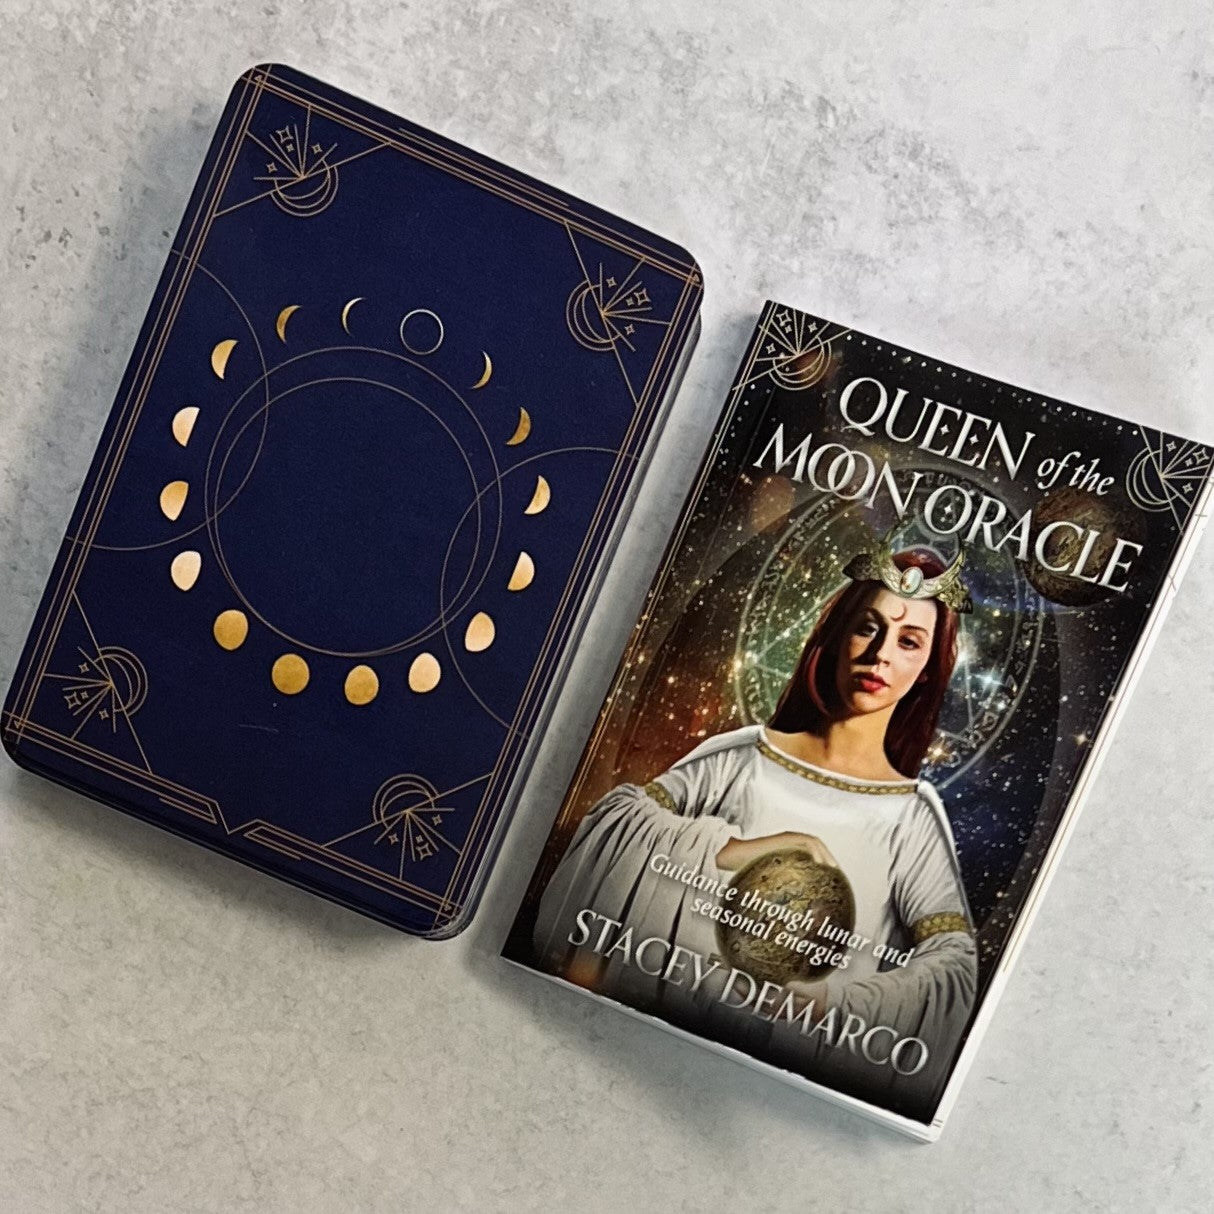 Queen of The Moon Oracle by Stacey Demarco